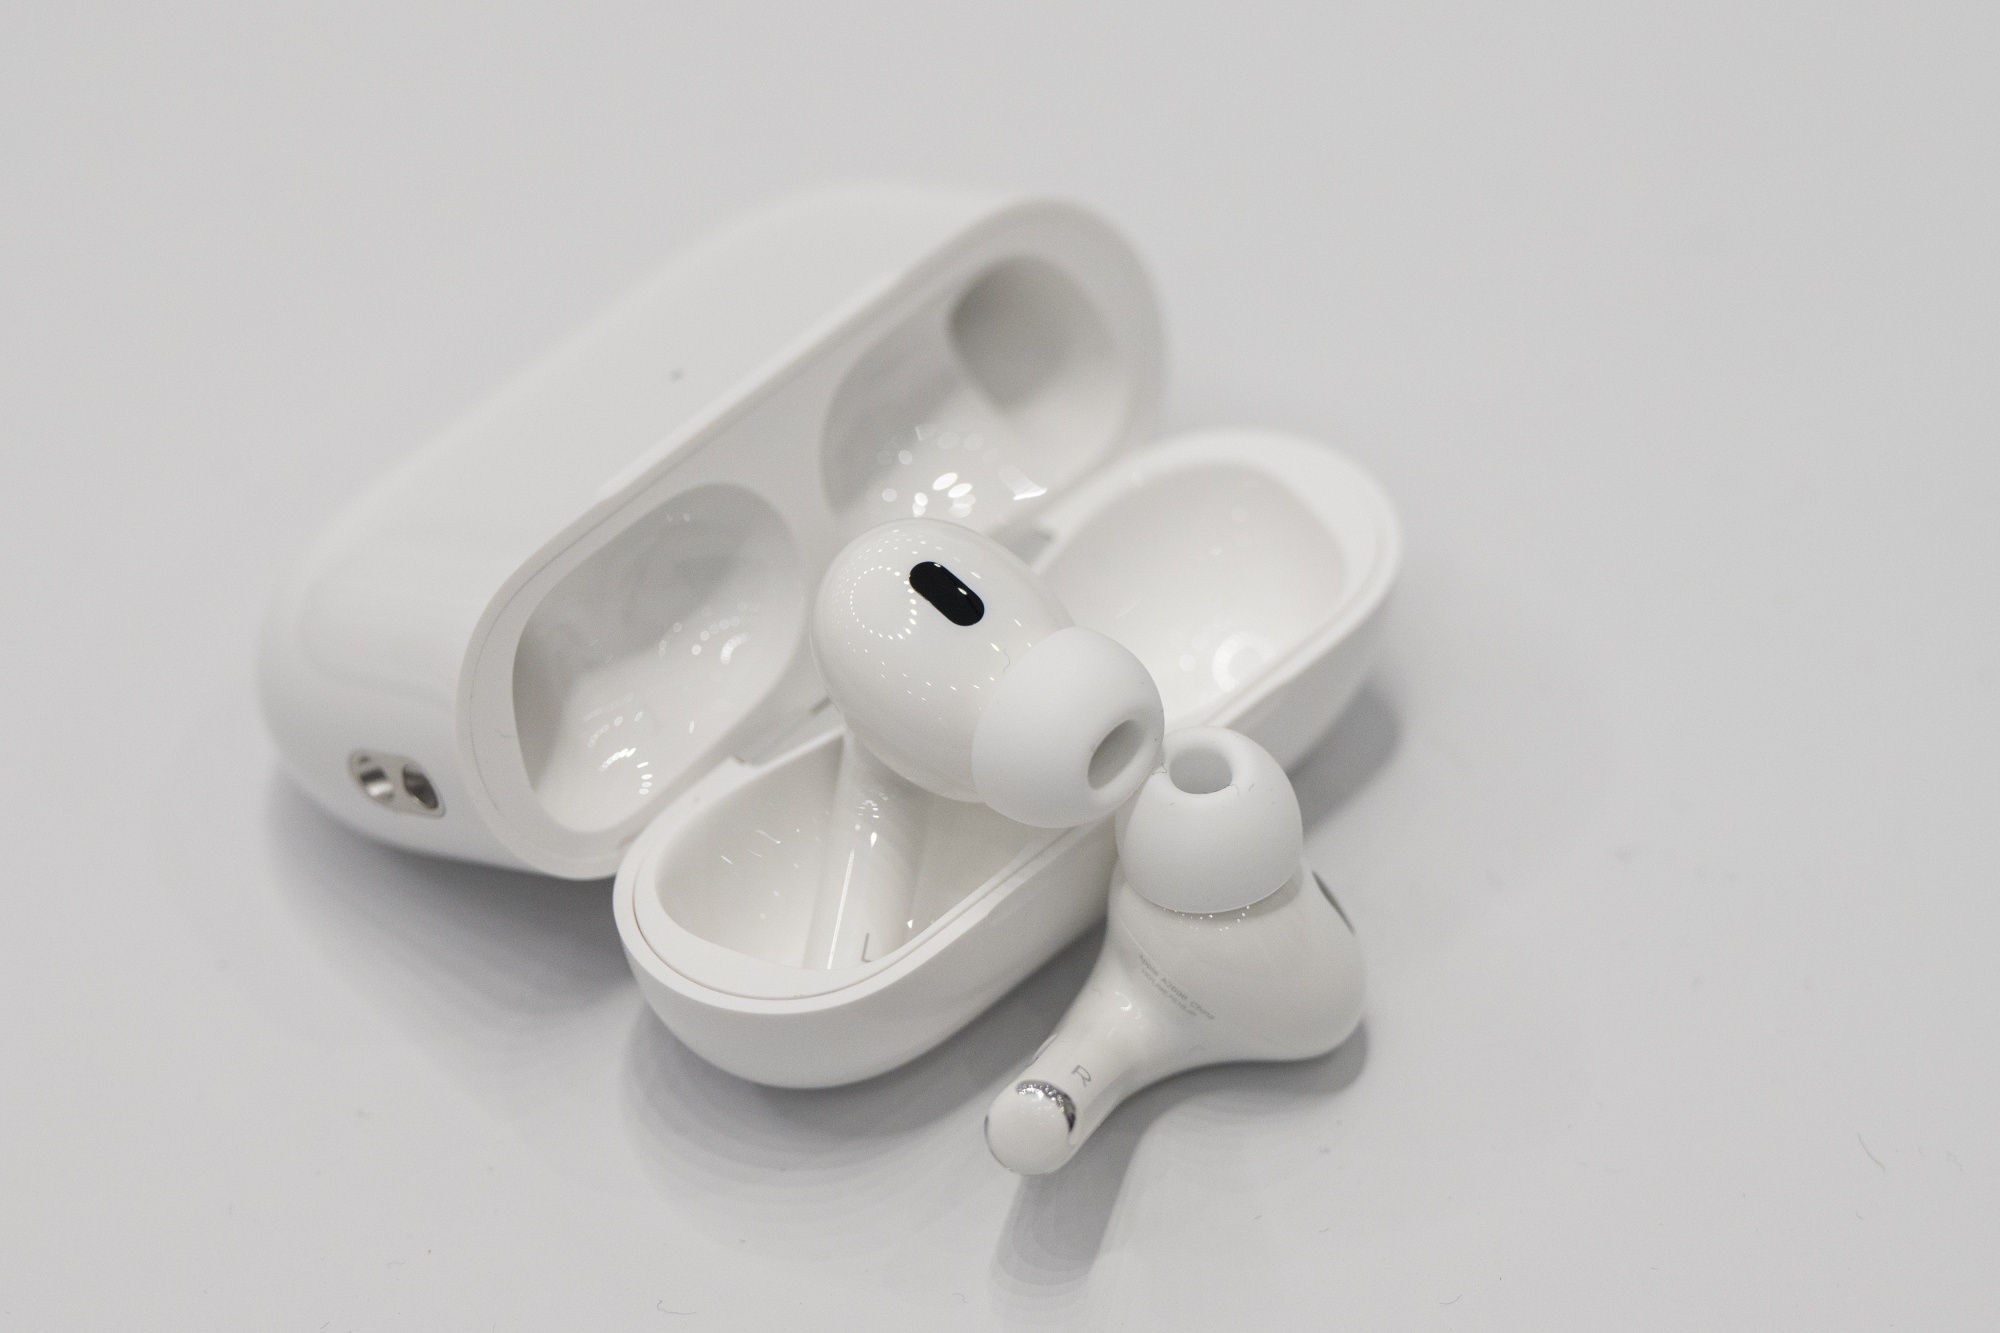 Apple AirPods Pro 2nd Gen USB-C Review: New Port and Adaptive Audio